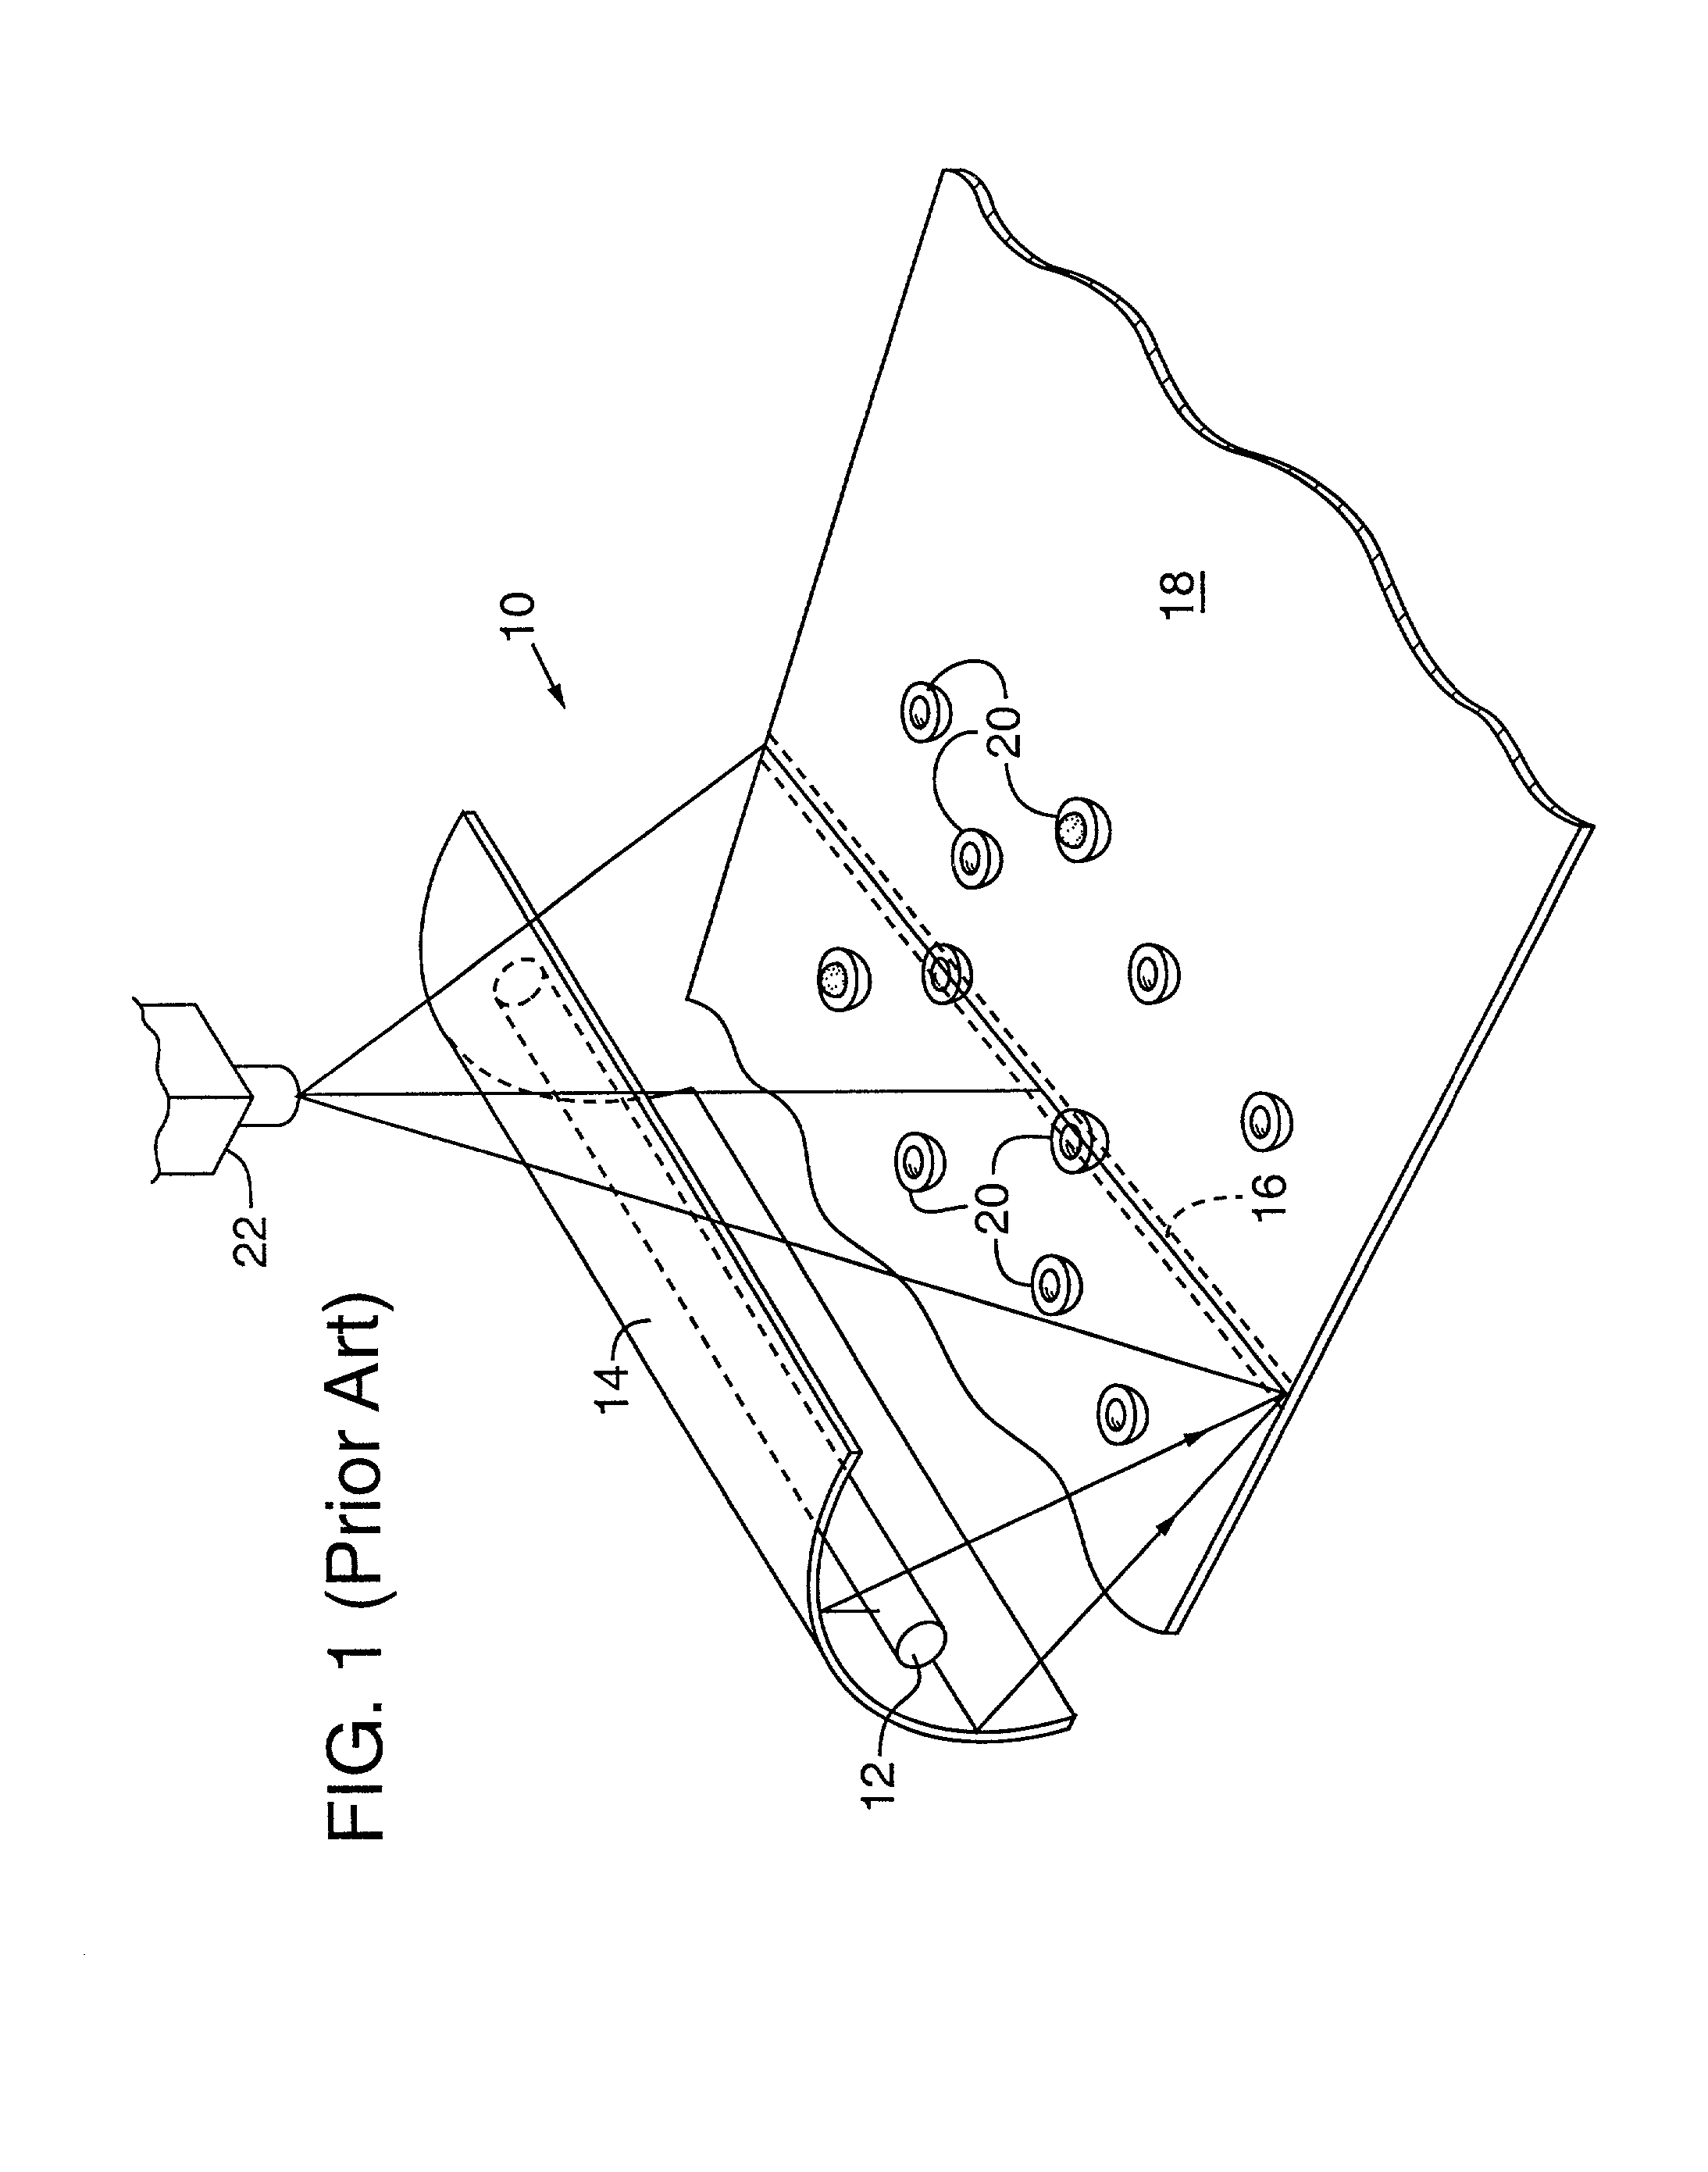 Agricultural article inspection apparatus and method employing spectral manipulation to enhance detection contrast ratio